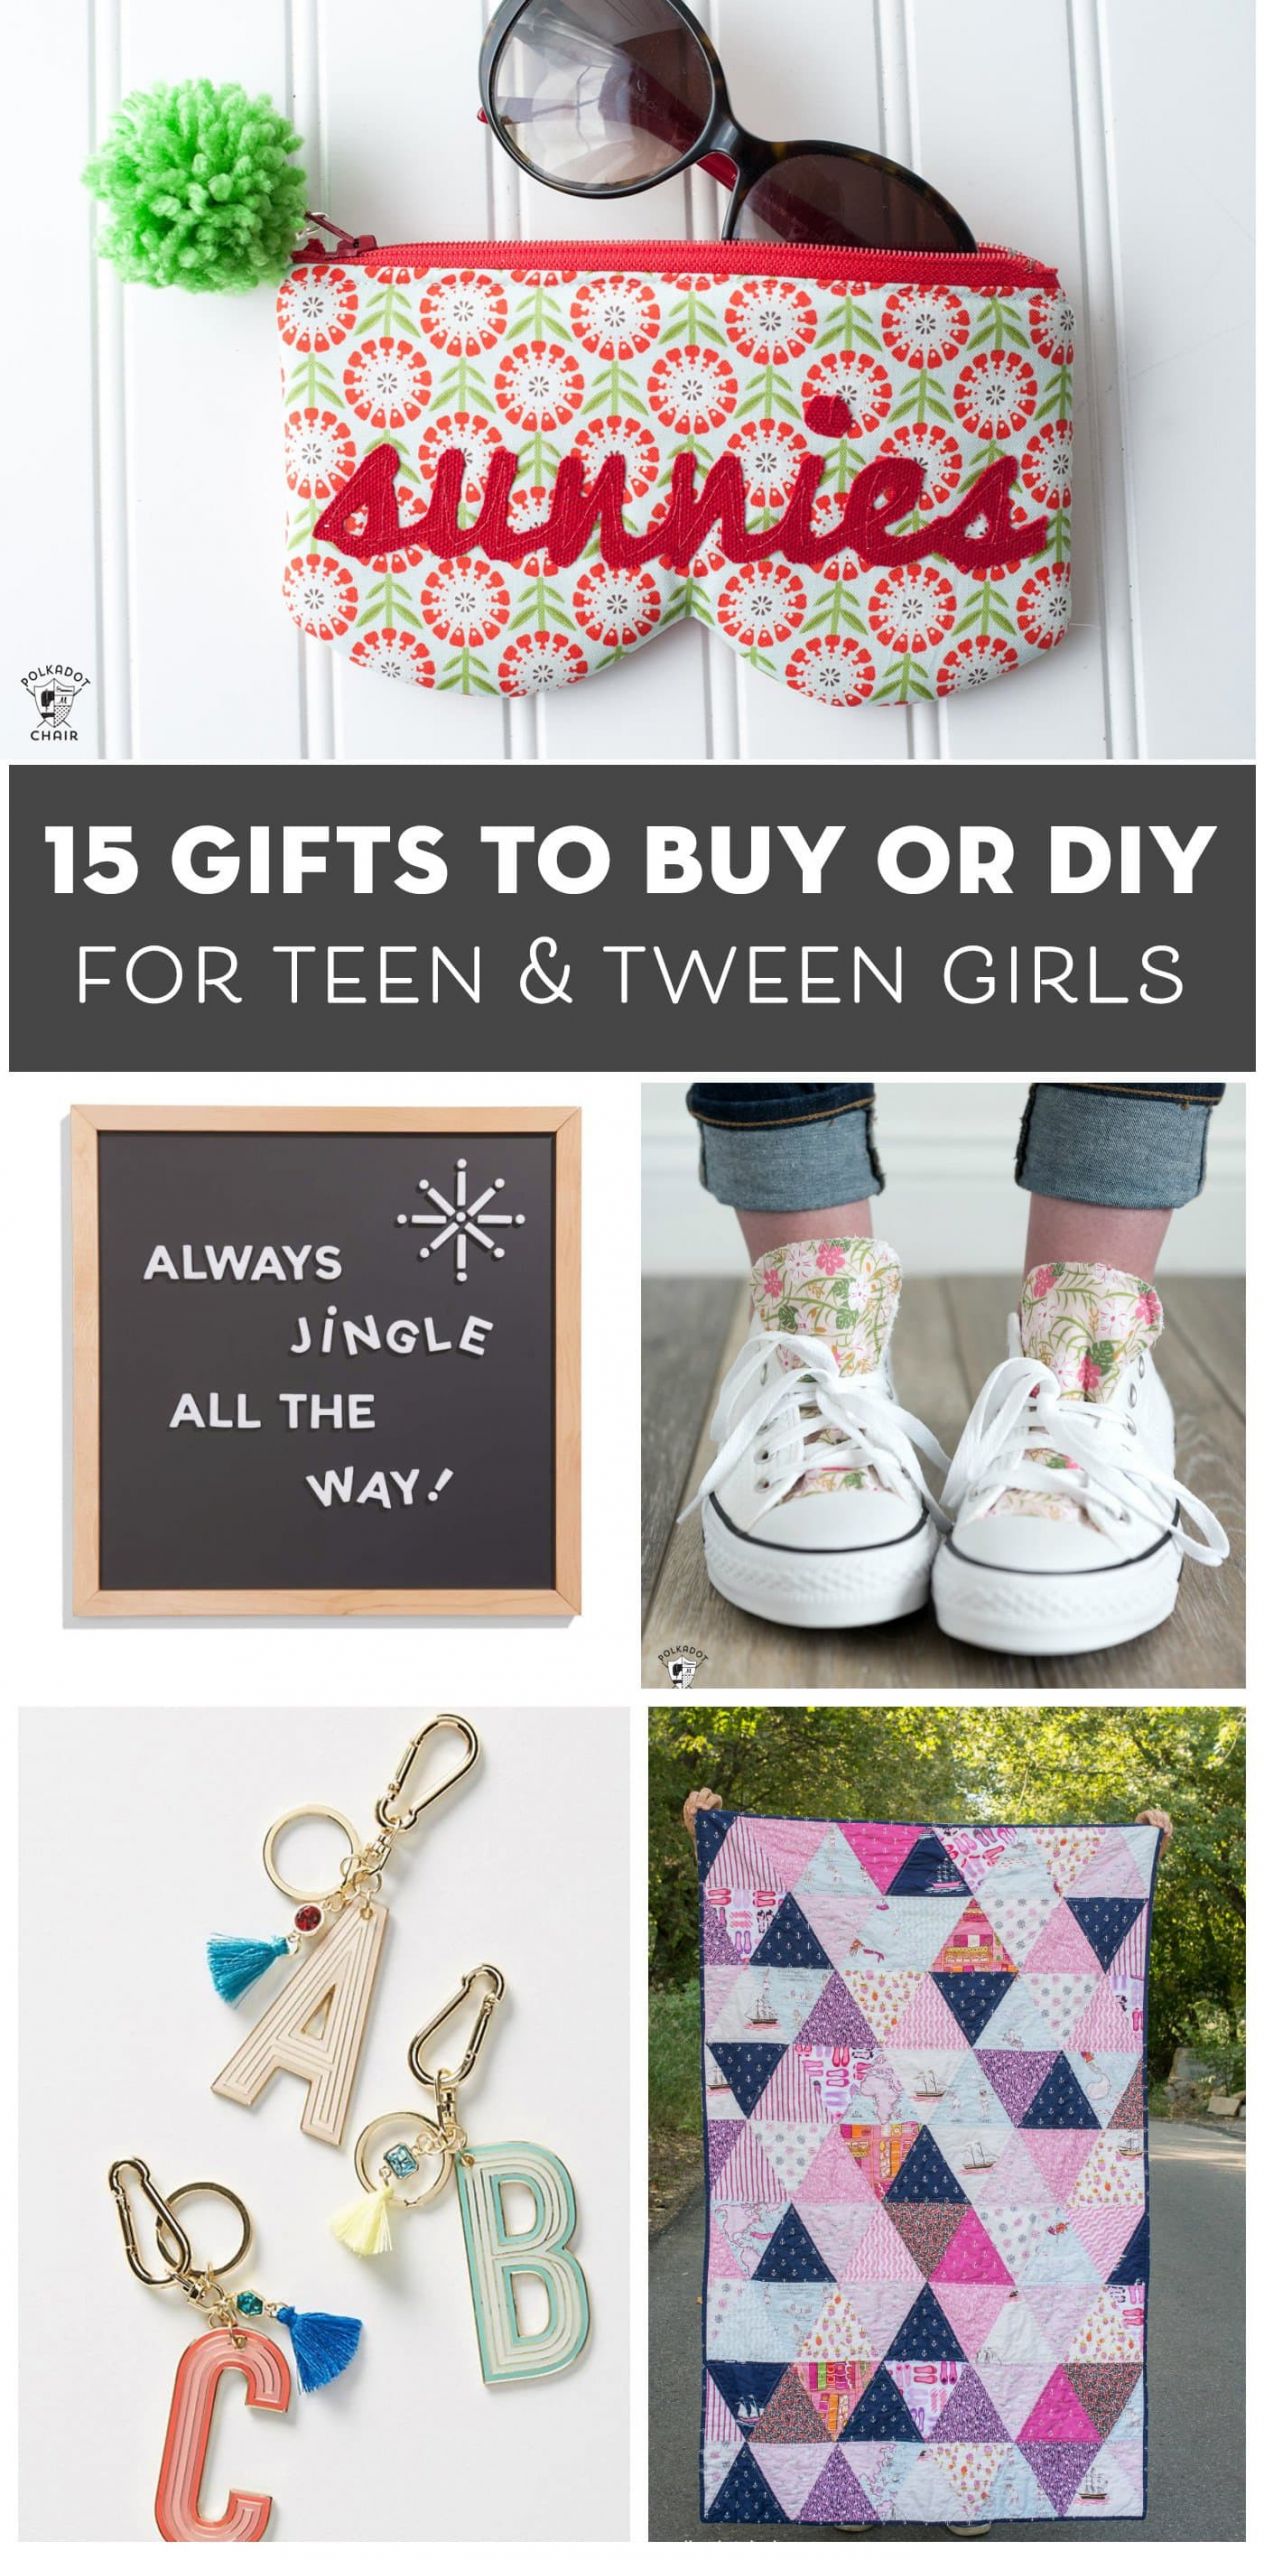 Teen Girls Gift Ideas
 15 Gift Ideas for Teenage Girls That You Can DIY or Buy